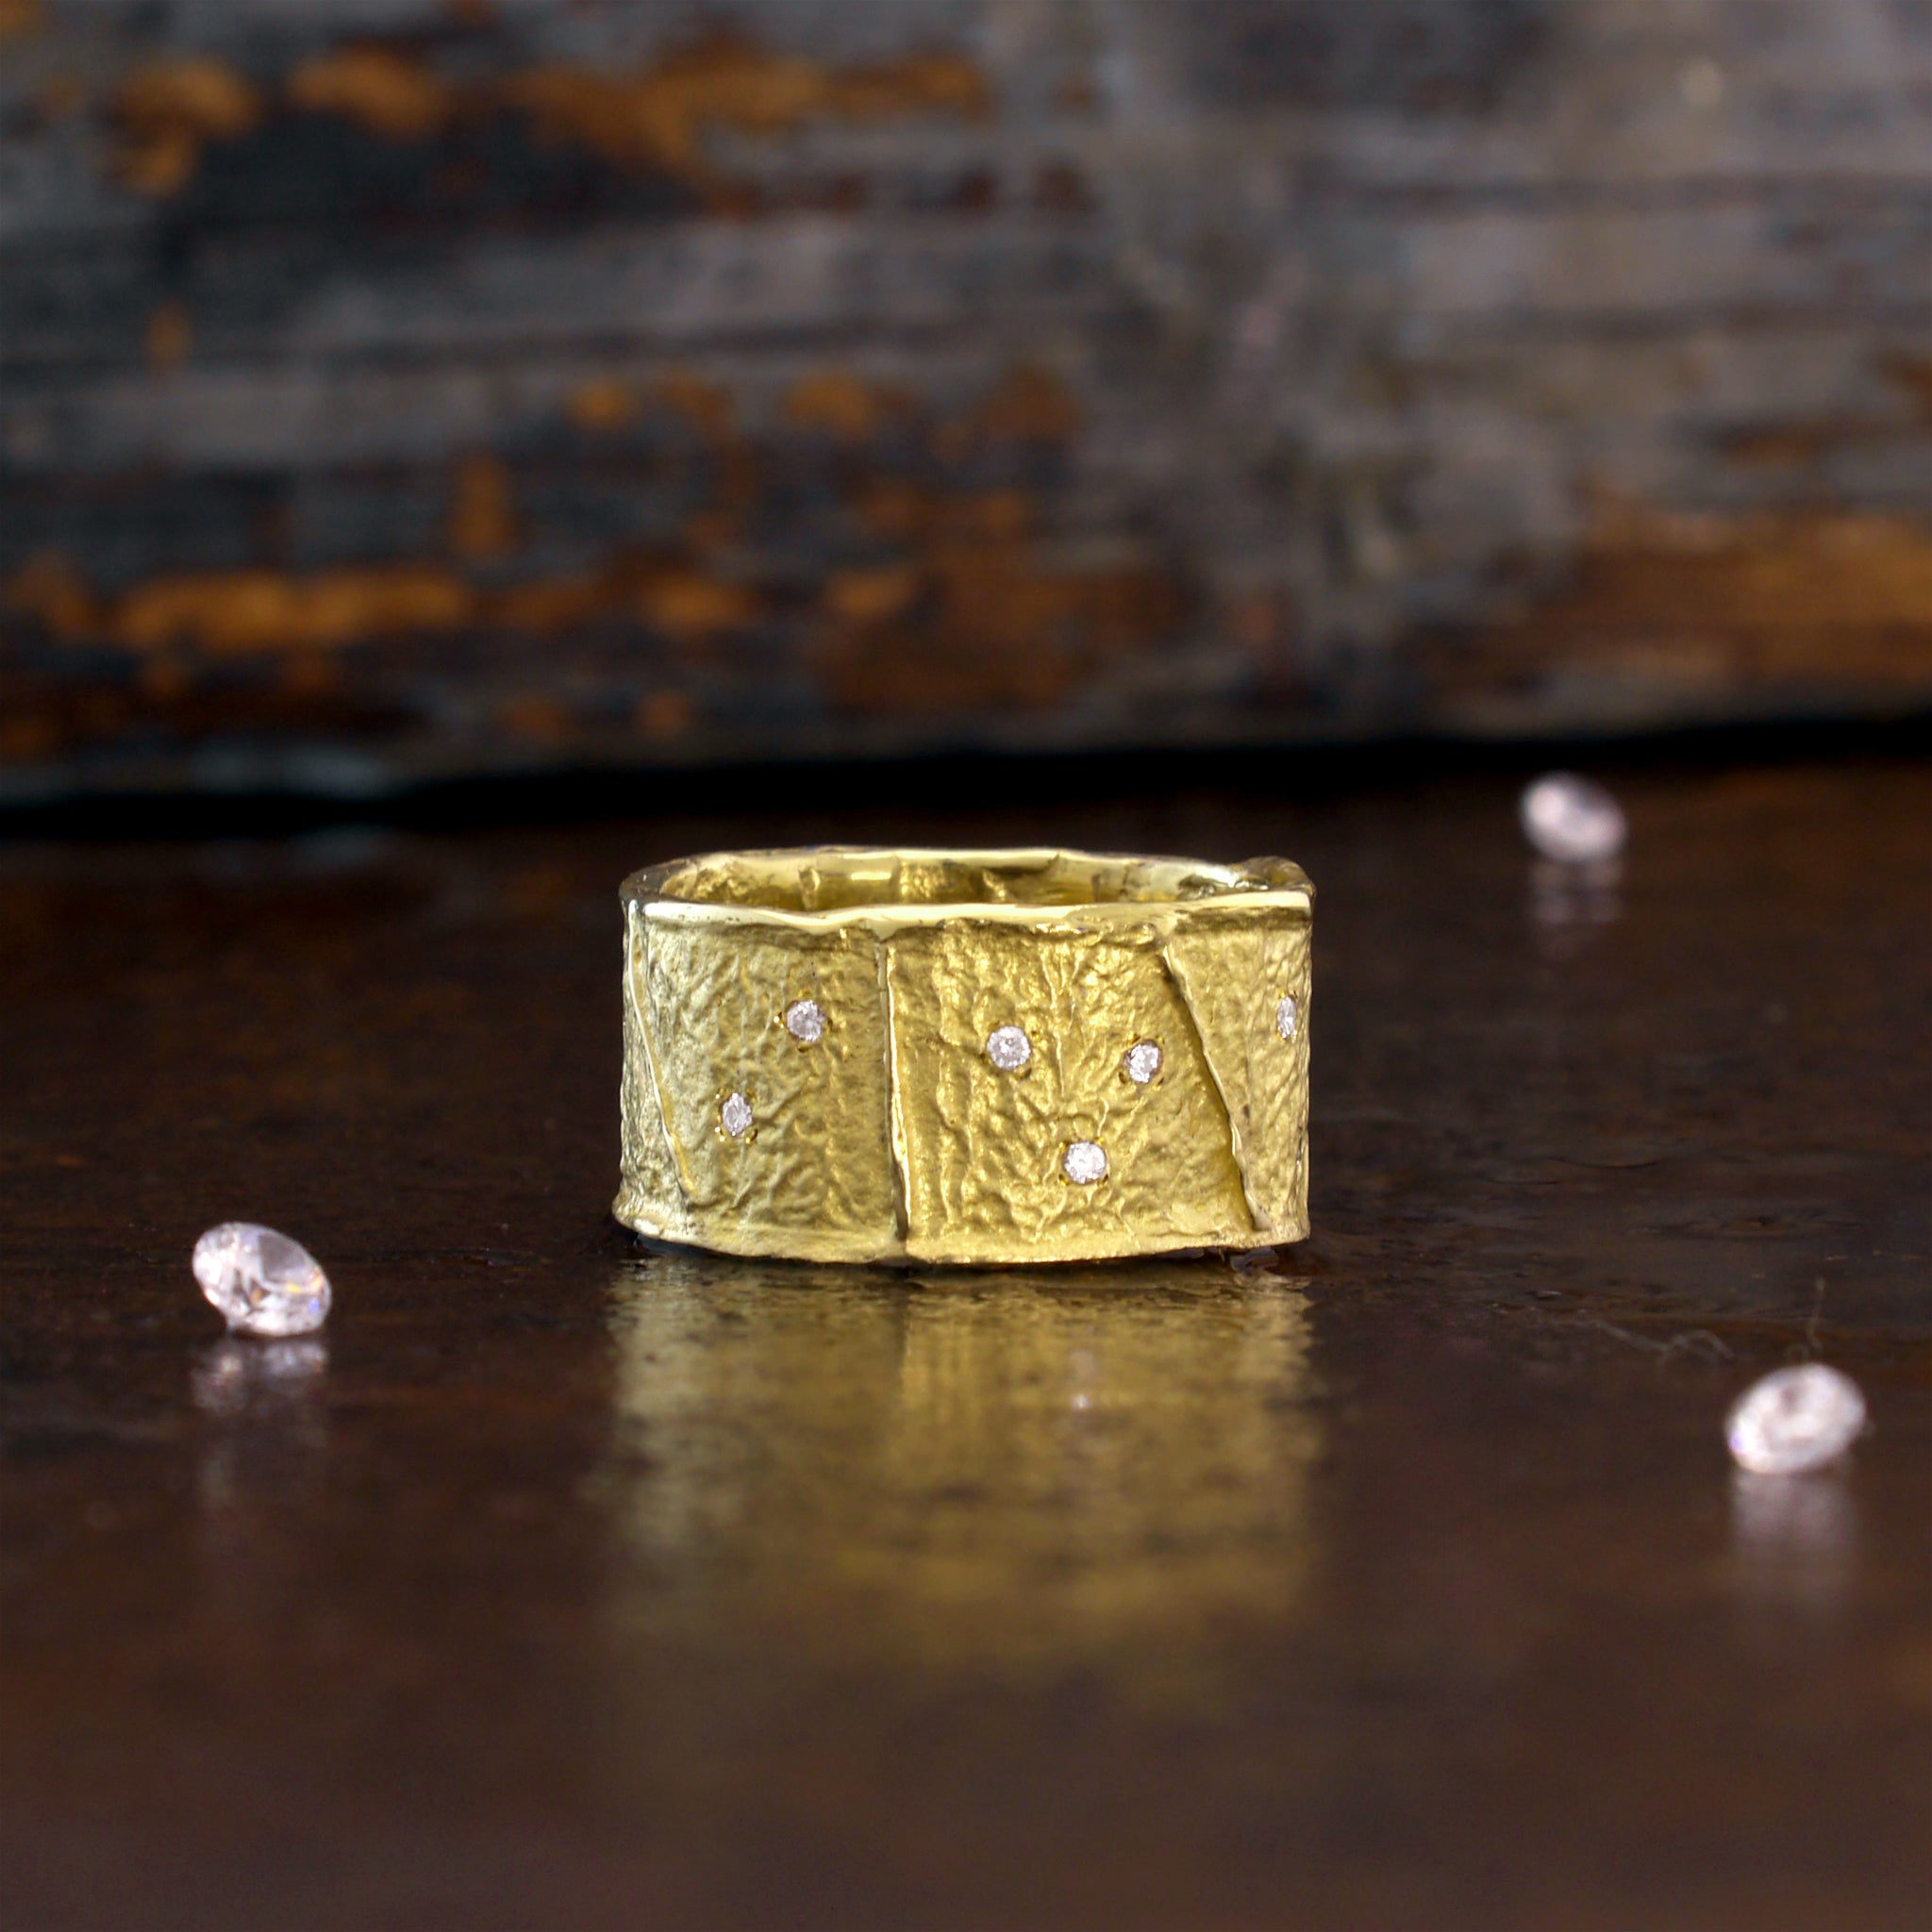 A stunning 18k Yellow Gold Ring, on a dark rustic background, featuring a unique wrinkled texture inspired by ancient Egyptian artistry, elegantly adorned with tiny sparkling diamonds for a timeless charm.